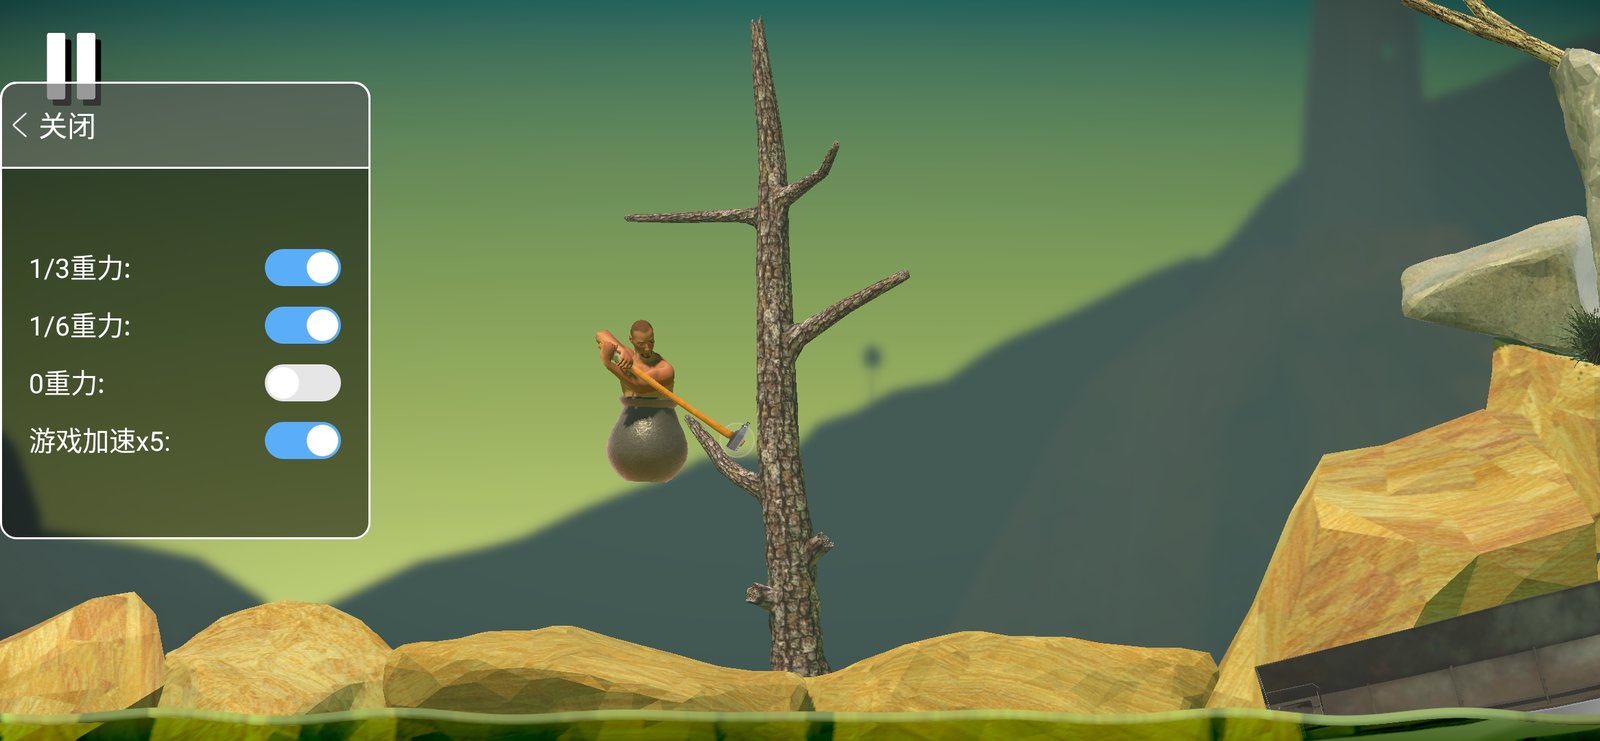 Getting Over It with Bennett Foddy v1.9.4 MOD APK -  -  Android & iOS MODs, Mobile Games & Apps